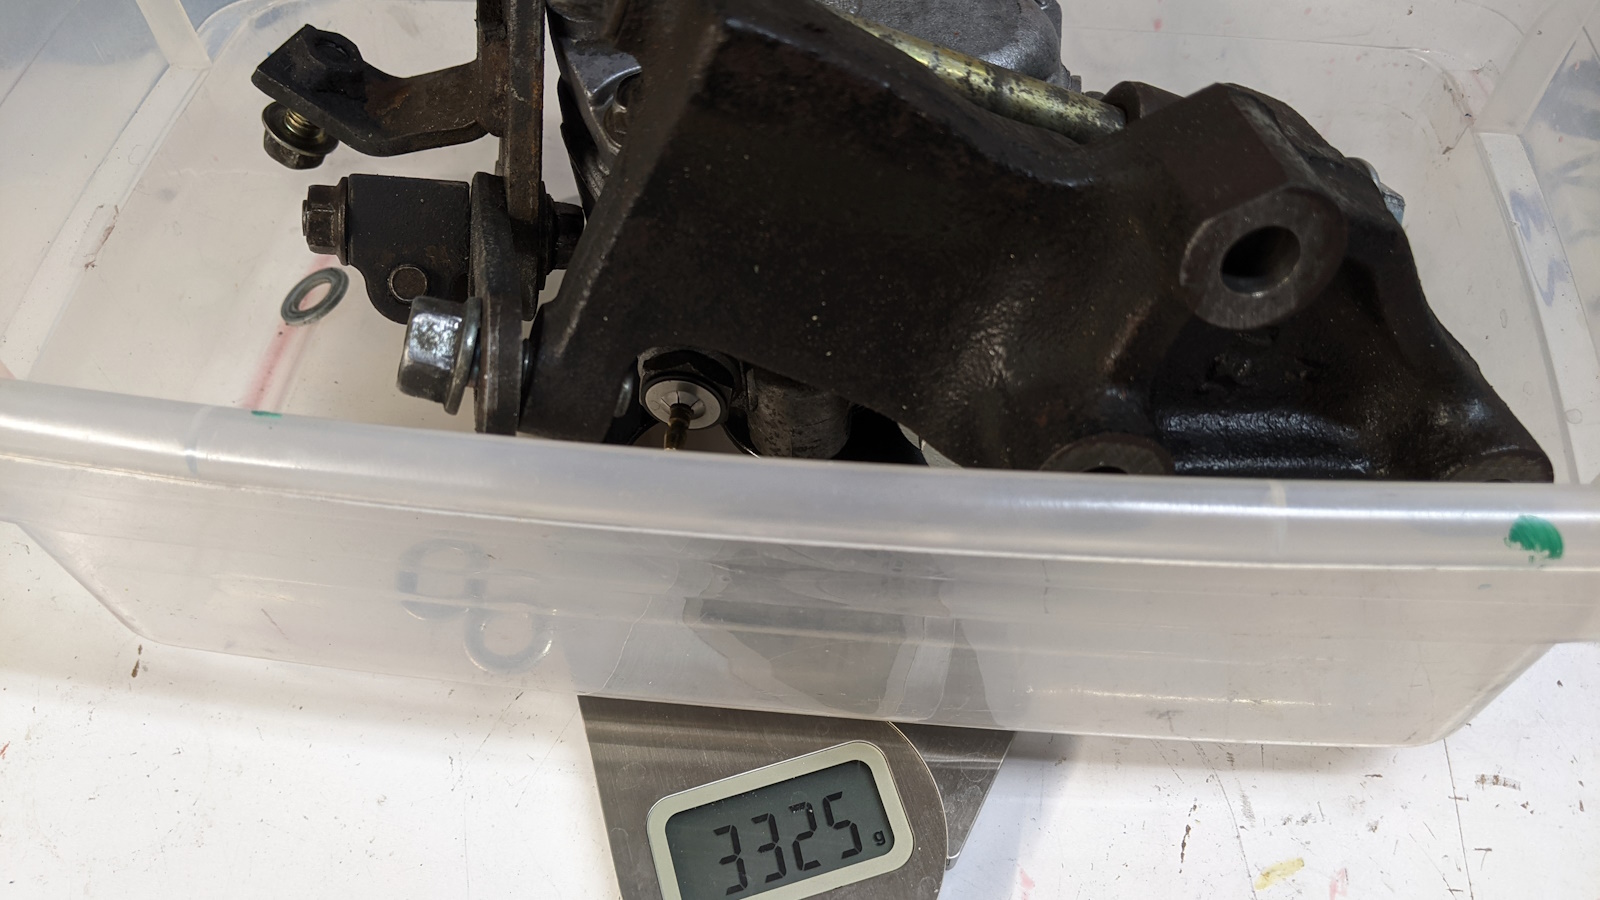 Final weight of the whole assembly